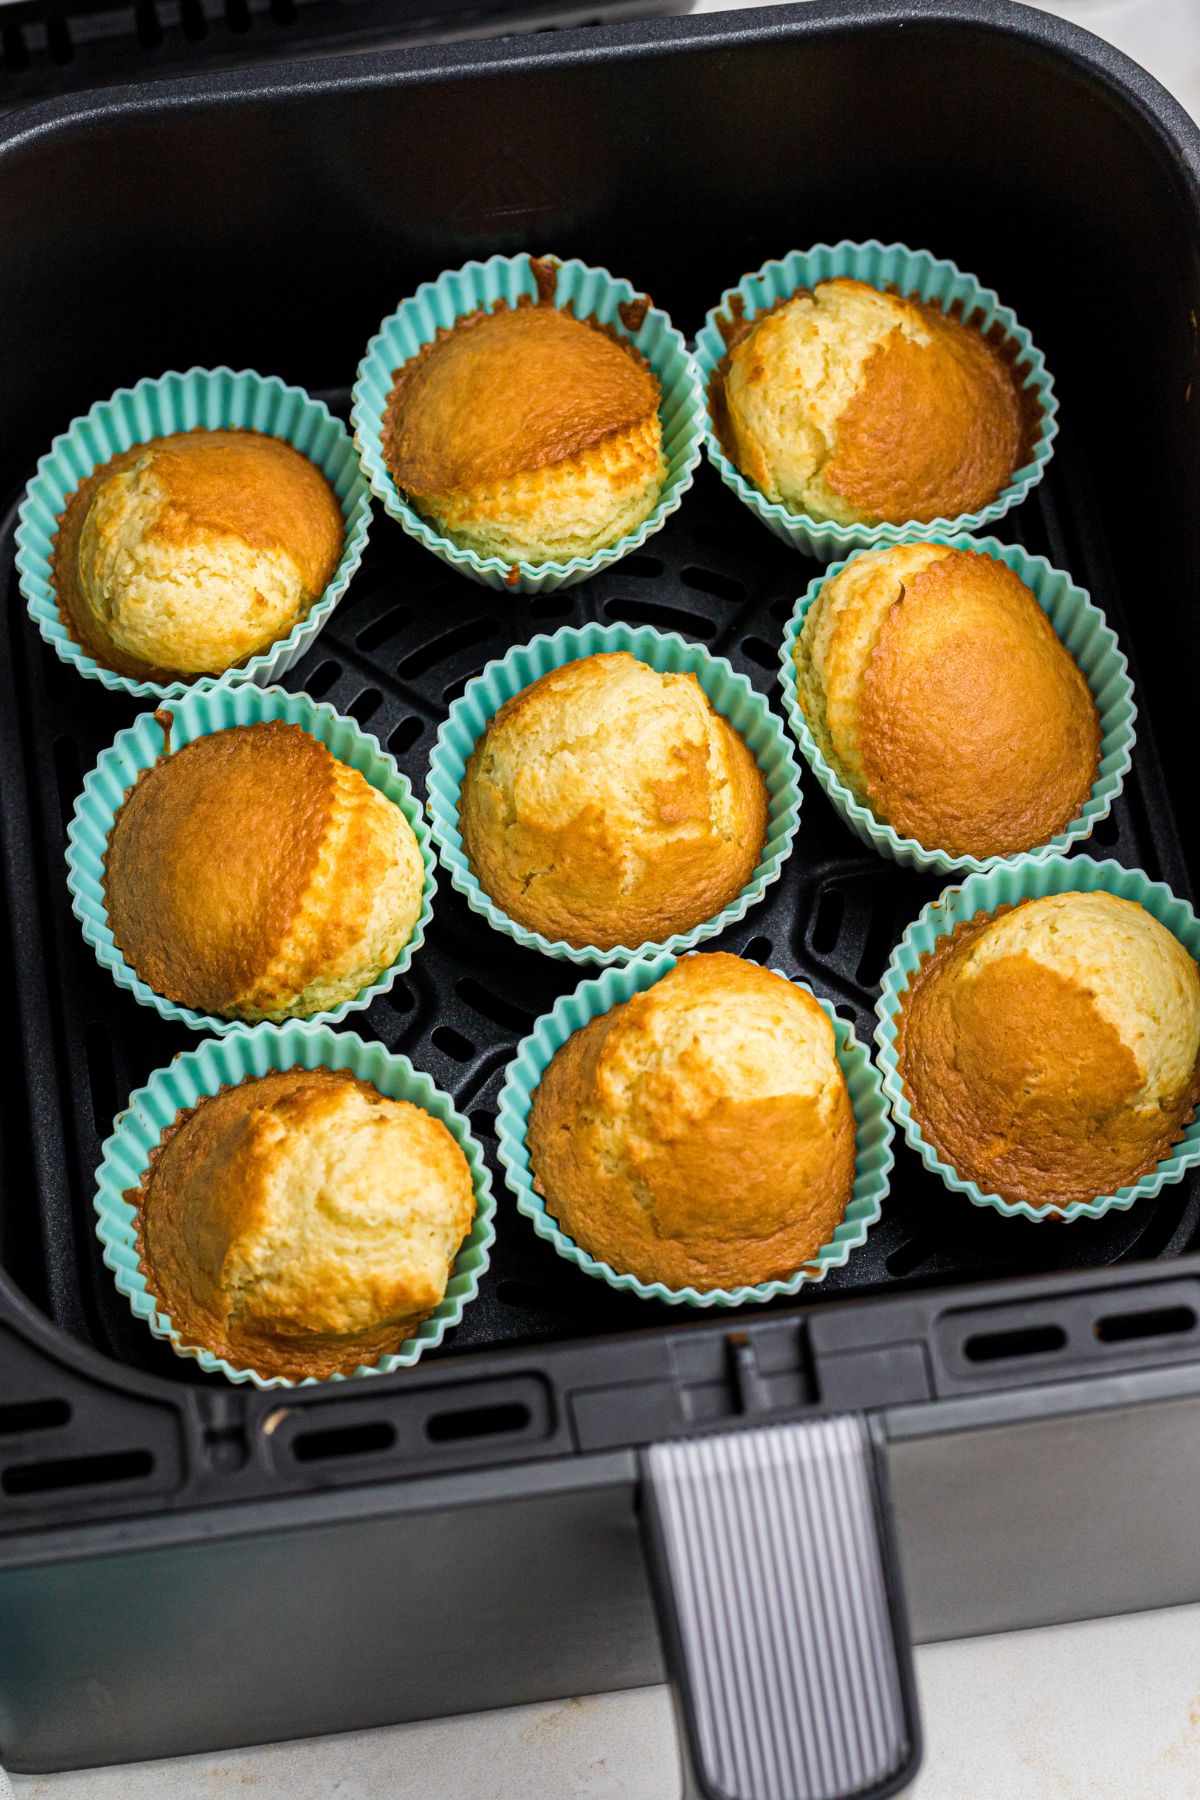 Golden French vanilla cupcakes in silicone liners in the air fryer basket.